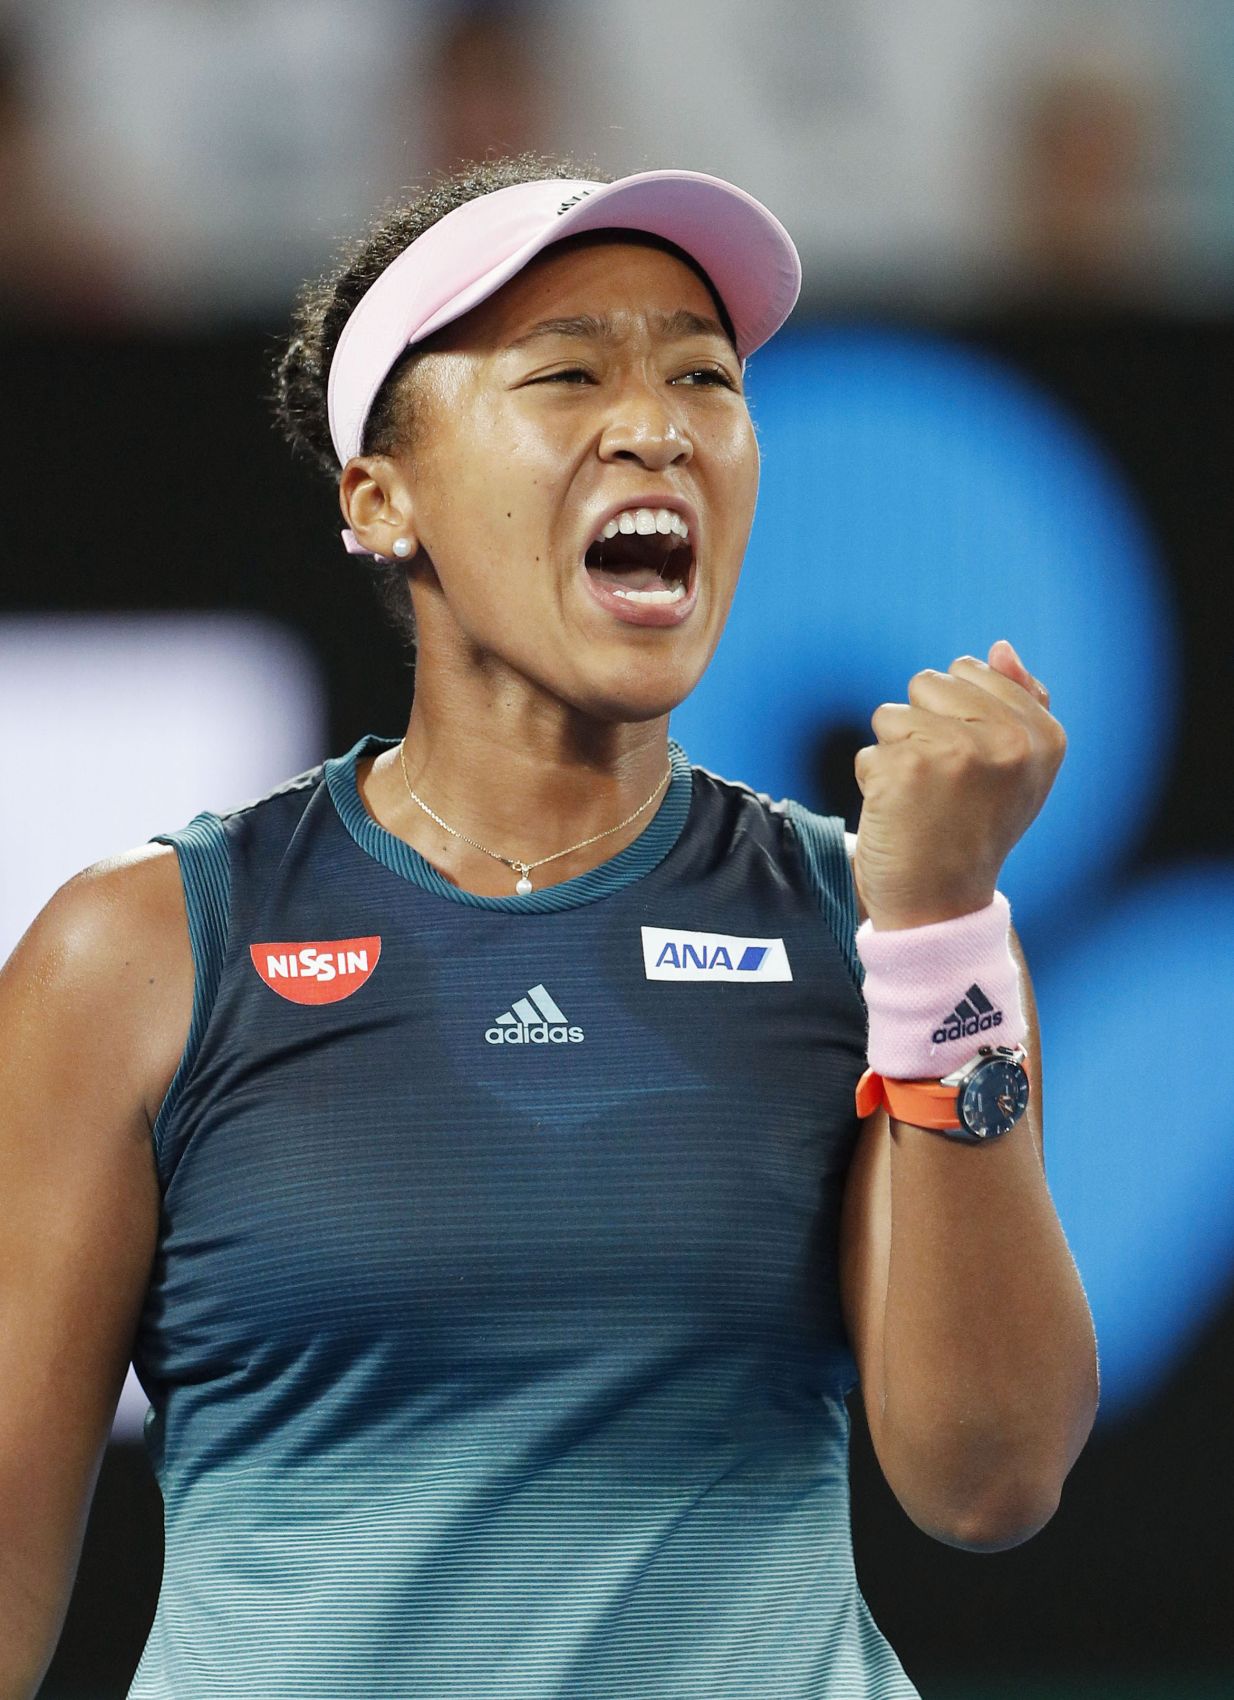 Naomi Osaka: High Hopes for the New Queen of Women’s Tennis